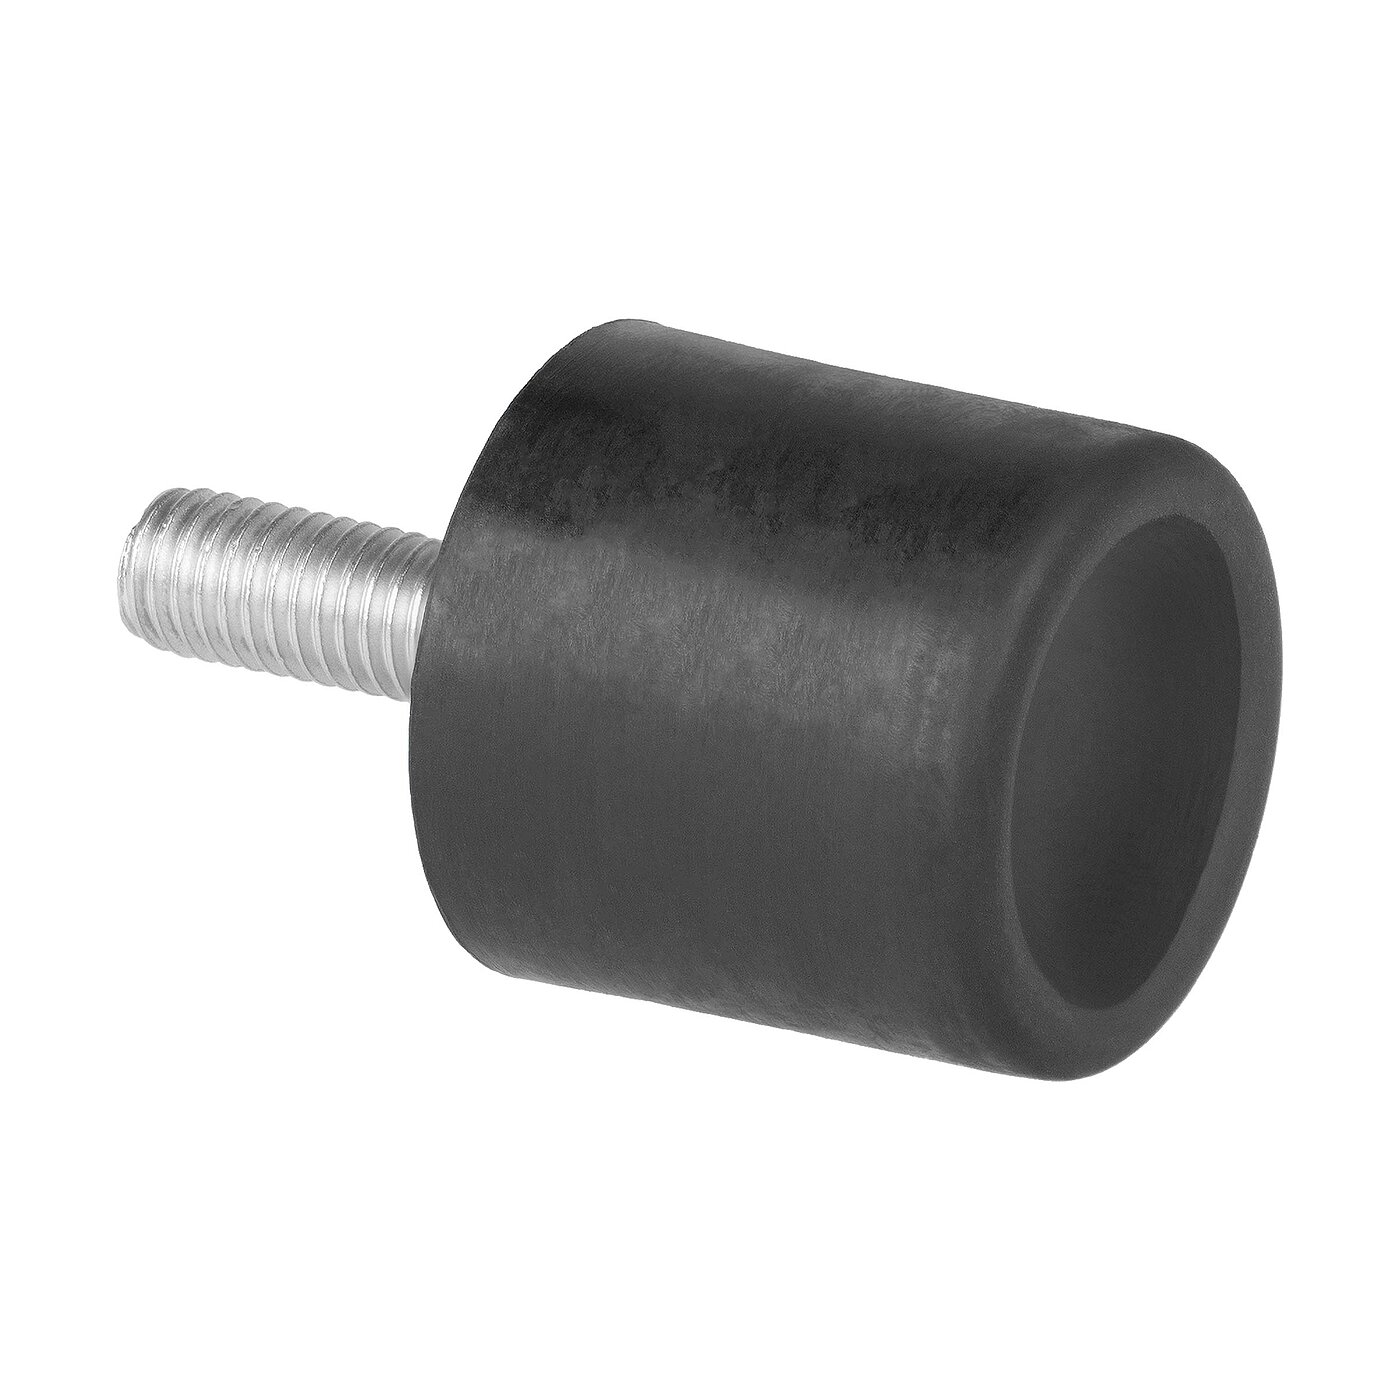 a rubber-metal bearing with outer thread on one side, black cylindrical elastomer corpus and convex-shaped inner curvature at the corpus end, isolated on white background